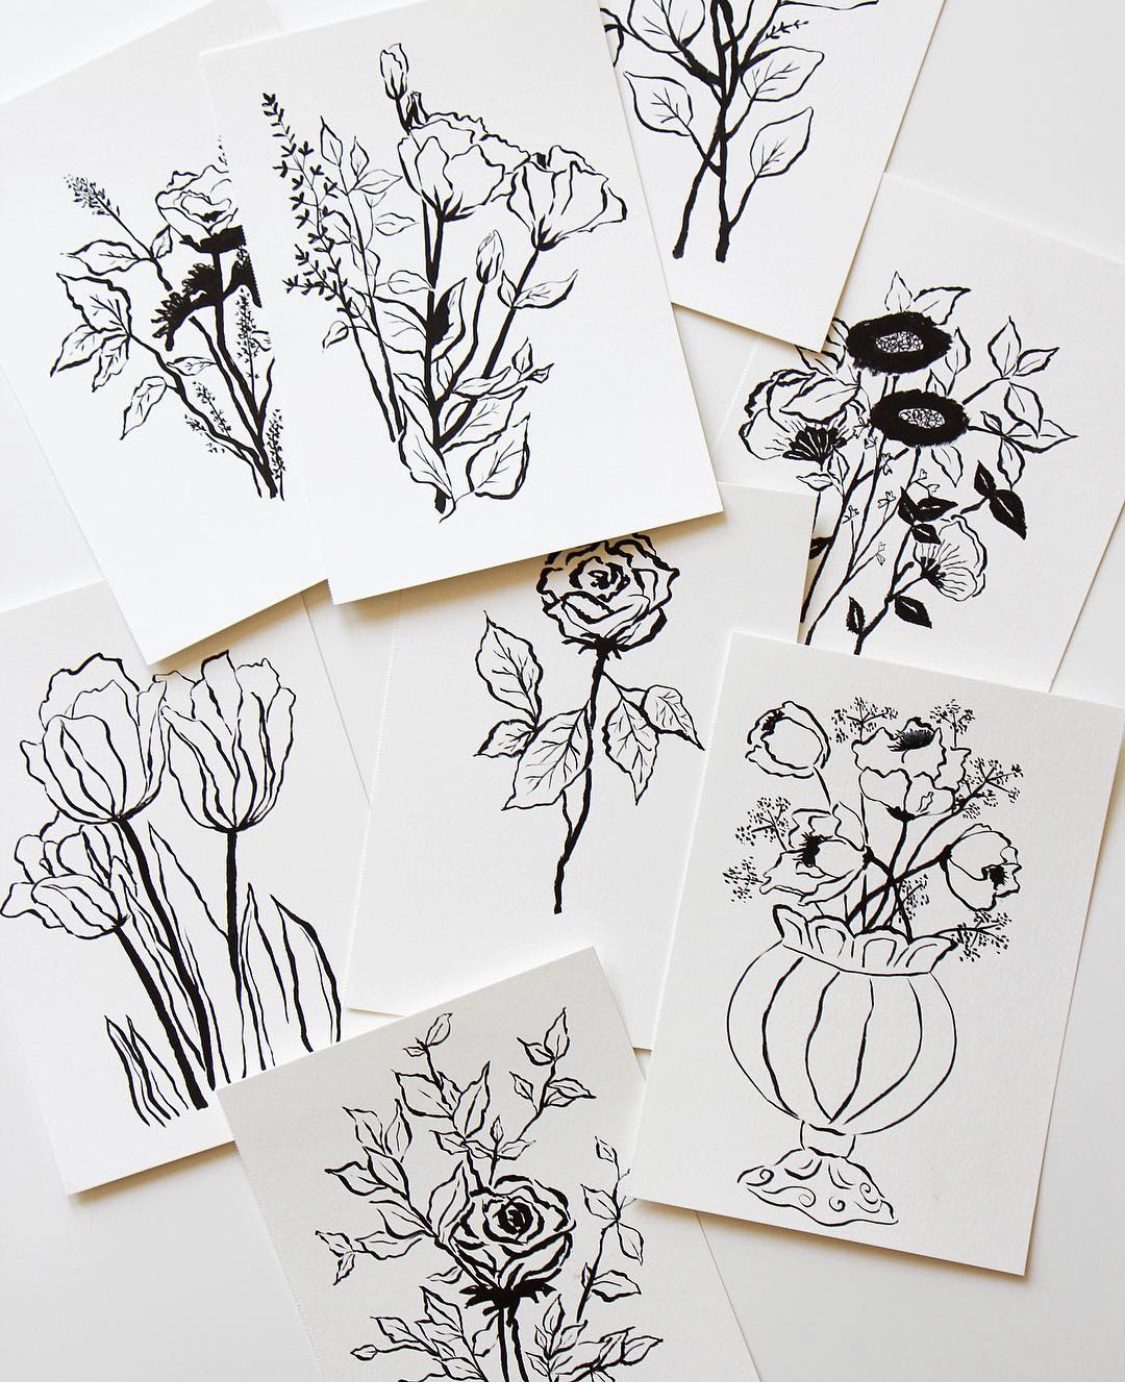 Amy Sinibaldi's black and white ink hand drawn flowers and vases.